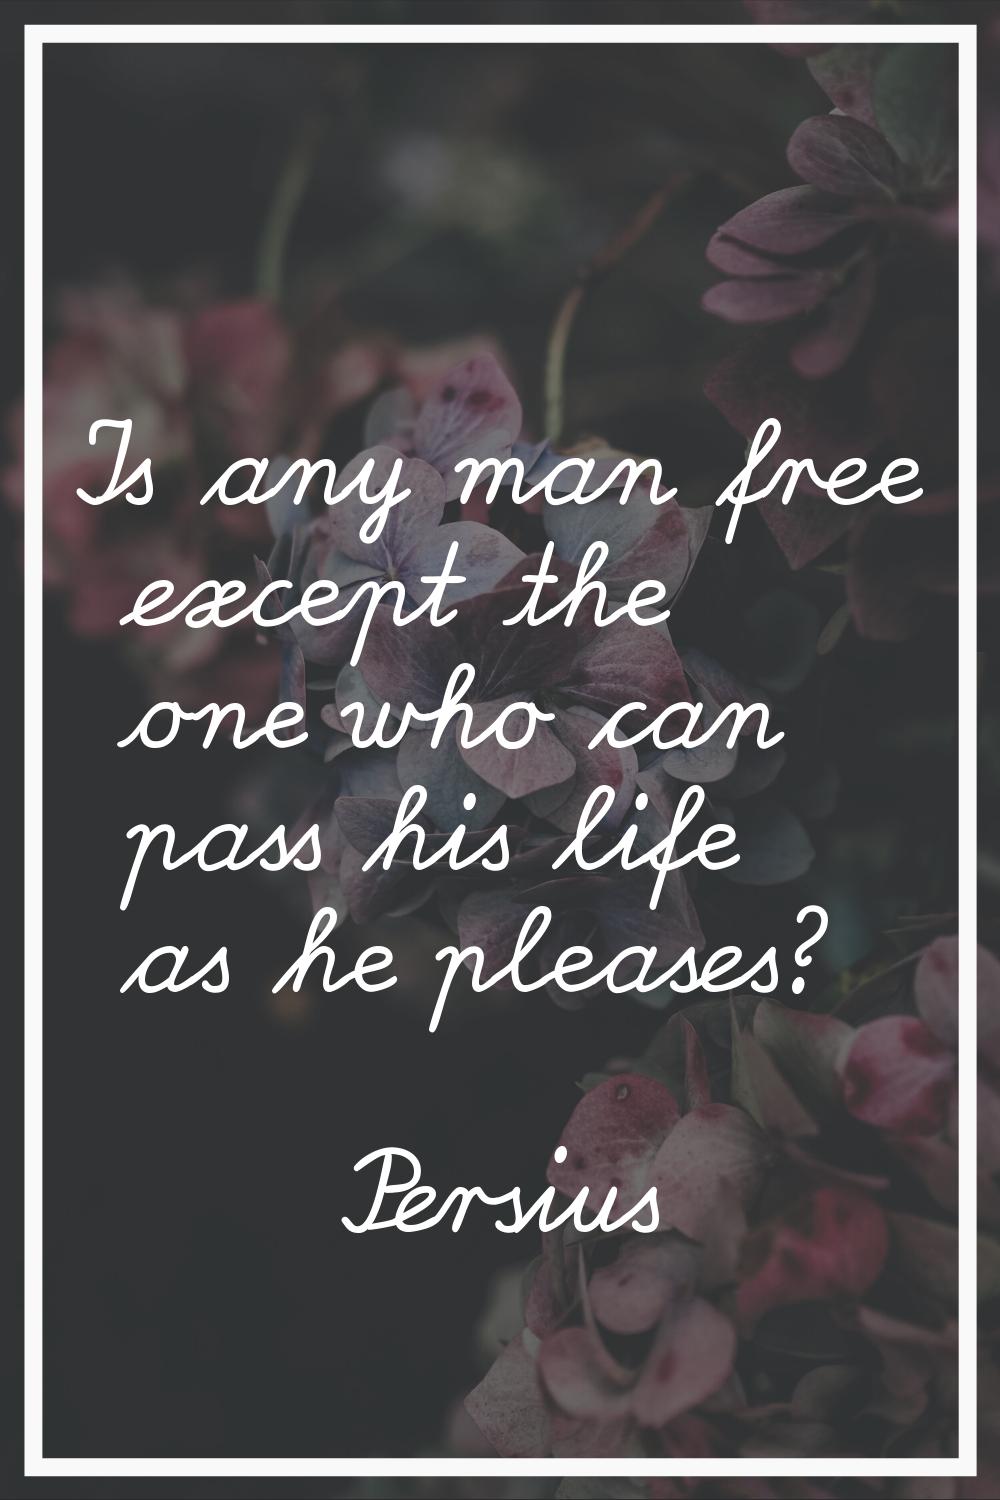 Is any man free except the one who can pass his life as he pleases?